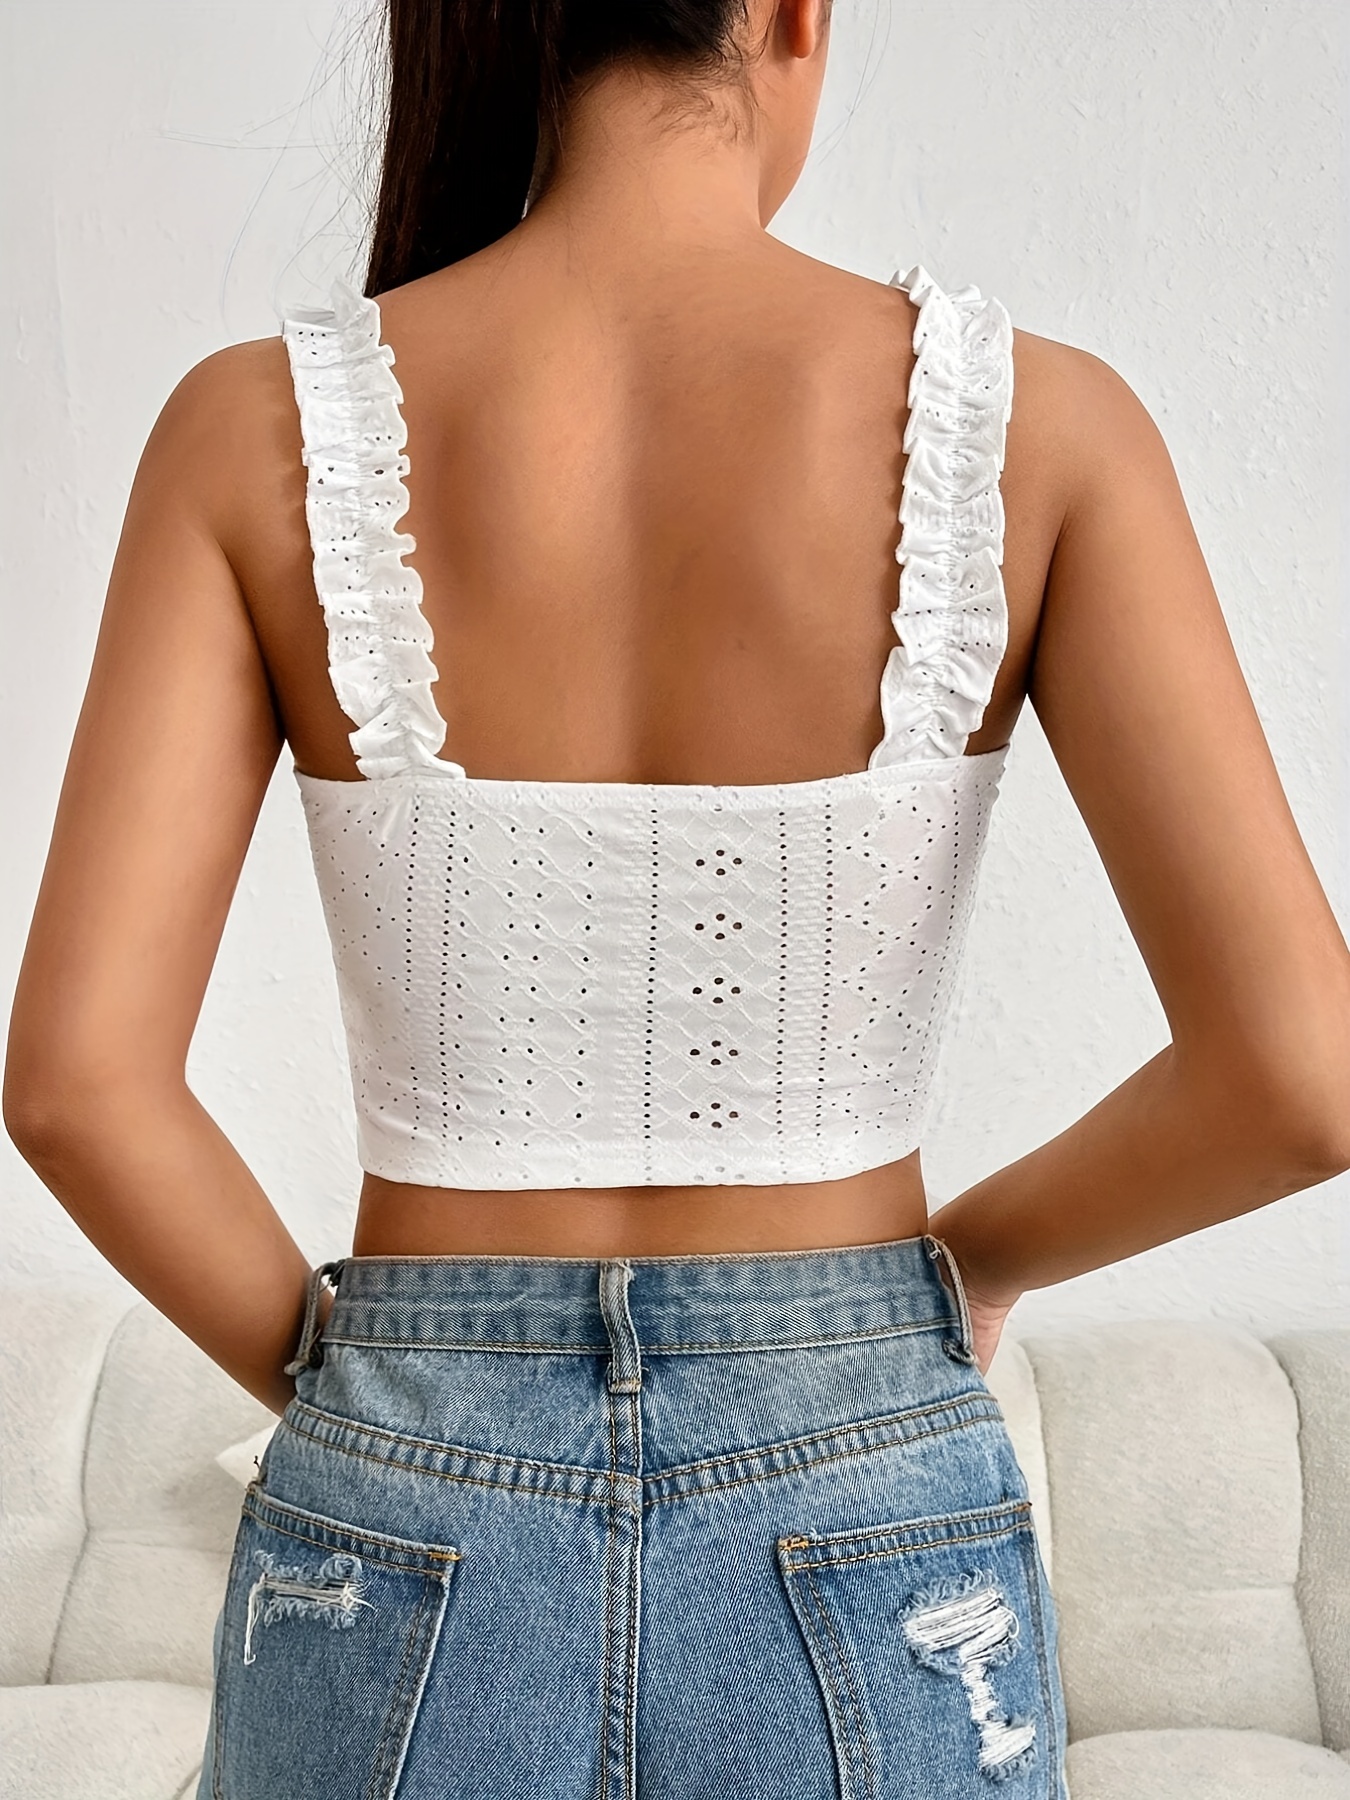 Women Y2K Cami Tank Top Spaghetti Strap Lace Trim Camisoles Square Neck  Sleeveless Crop Top Summer Streetwear, X-black Crop Top, Small